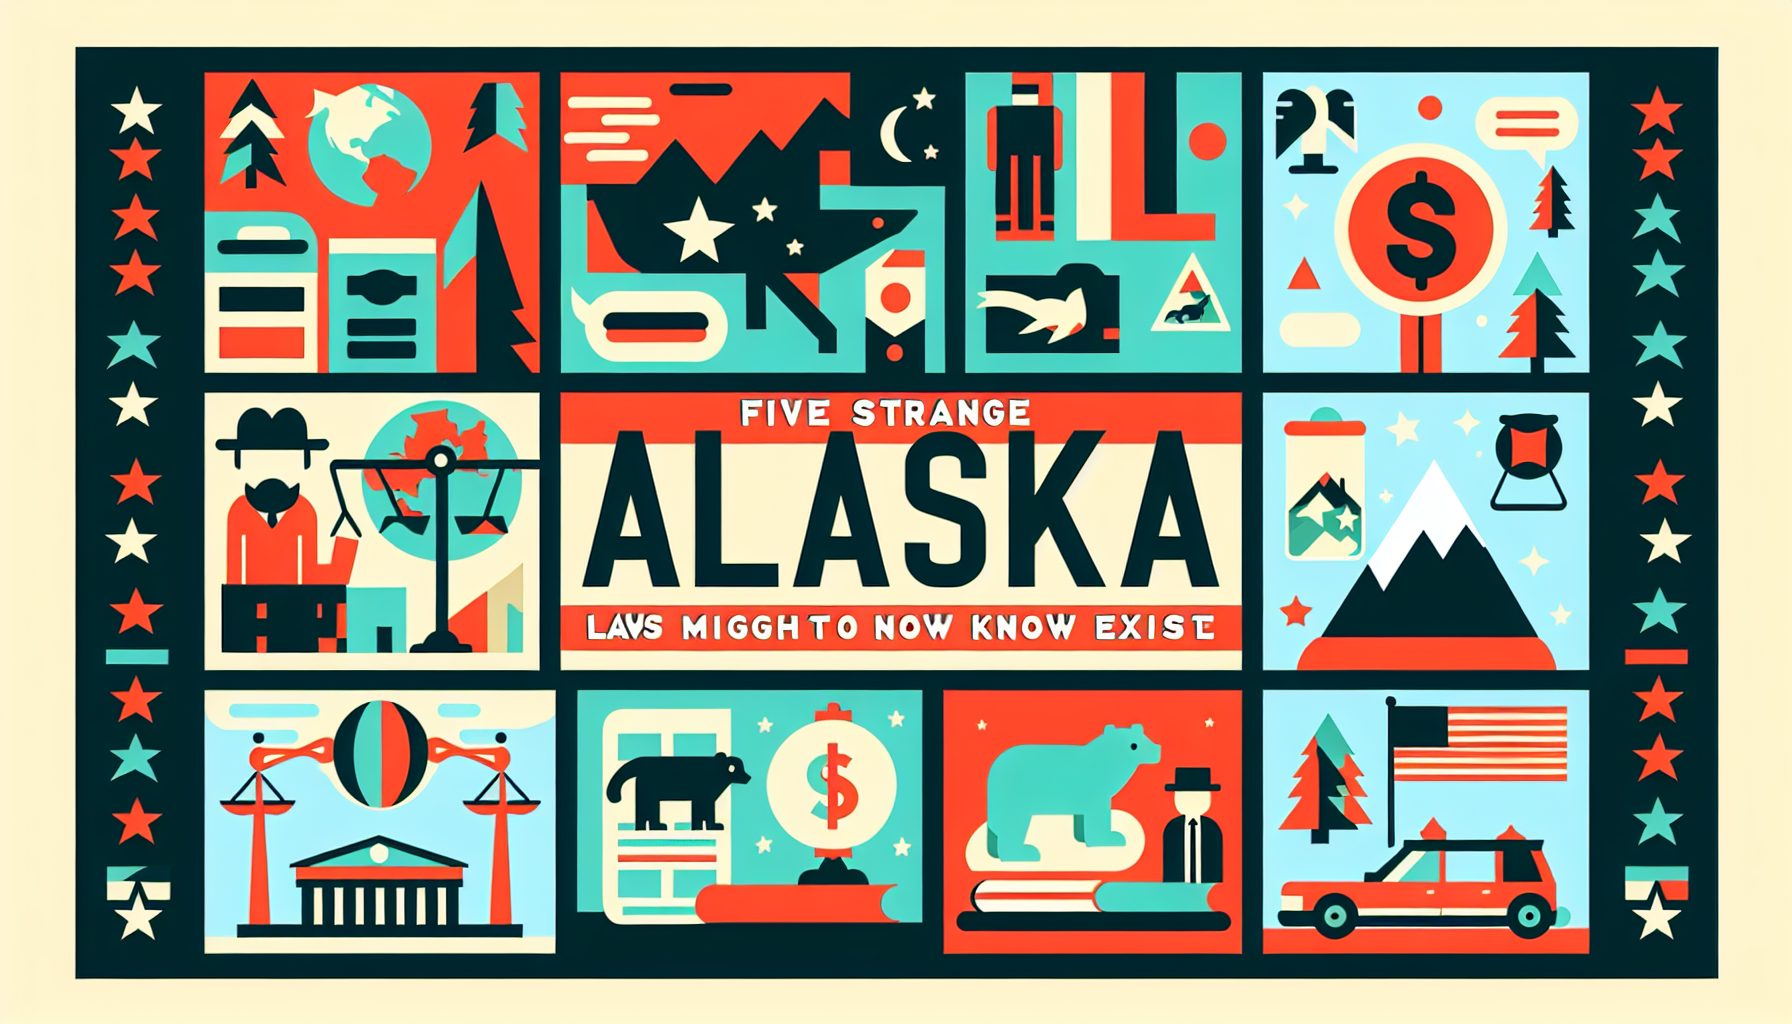 5 Strange Alaska Laws You Didn’t Know Existed